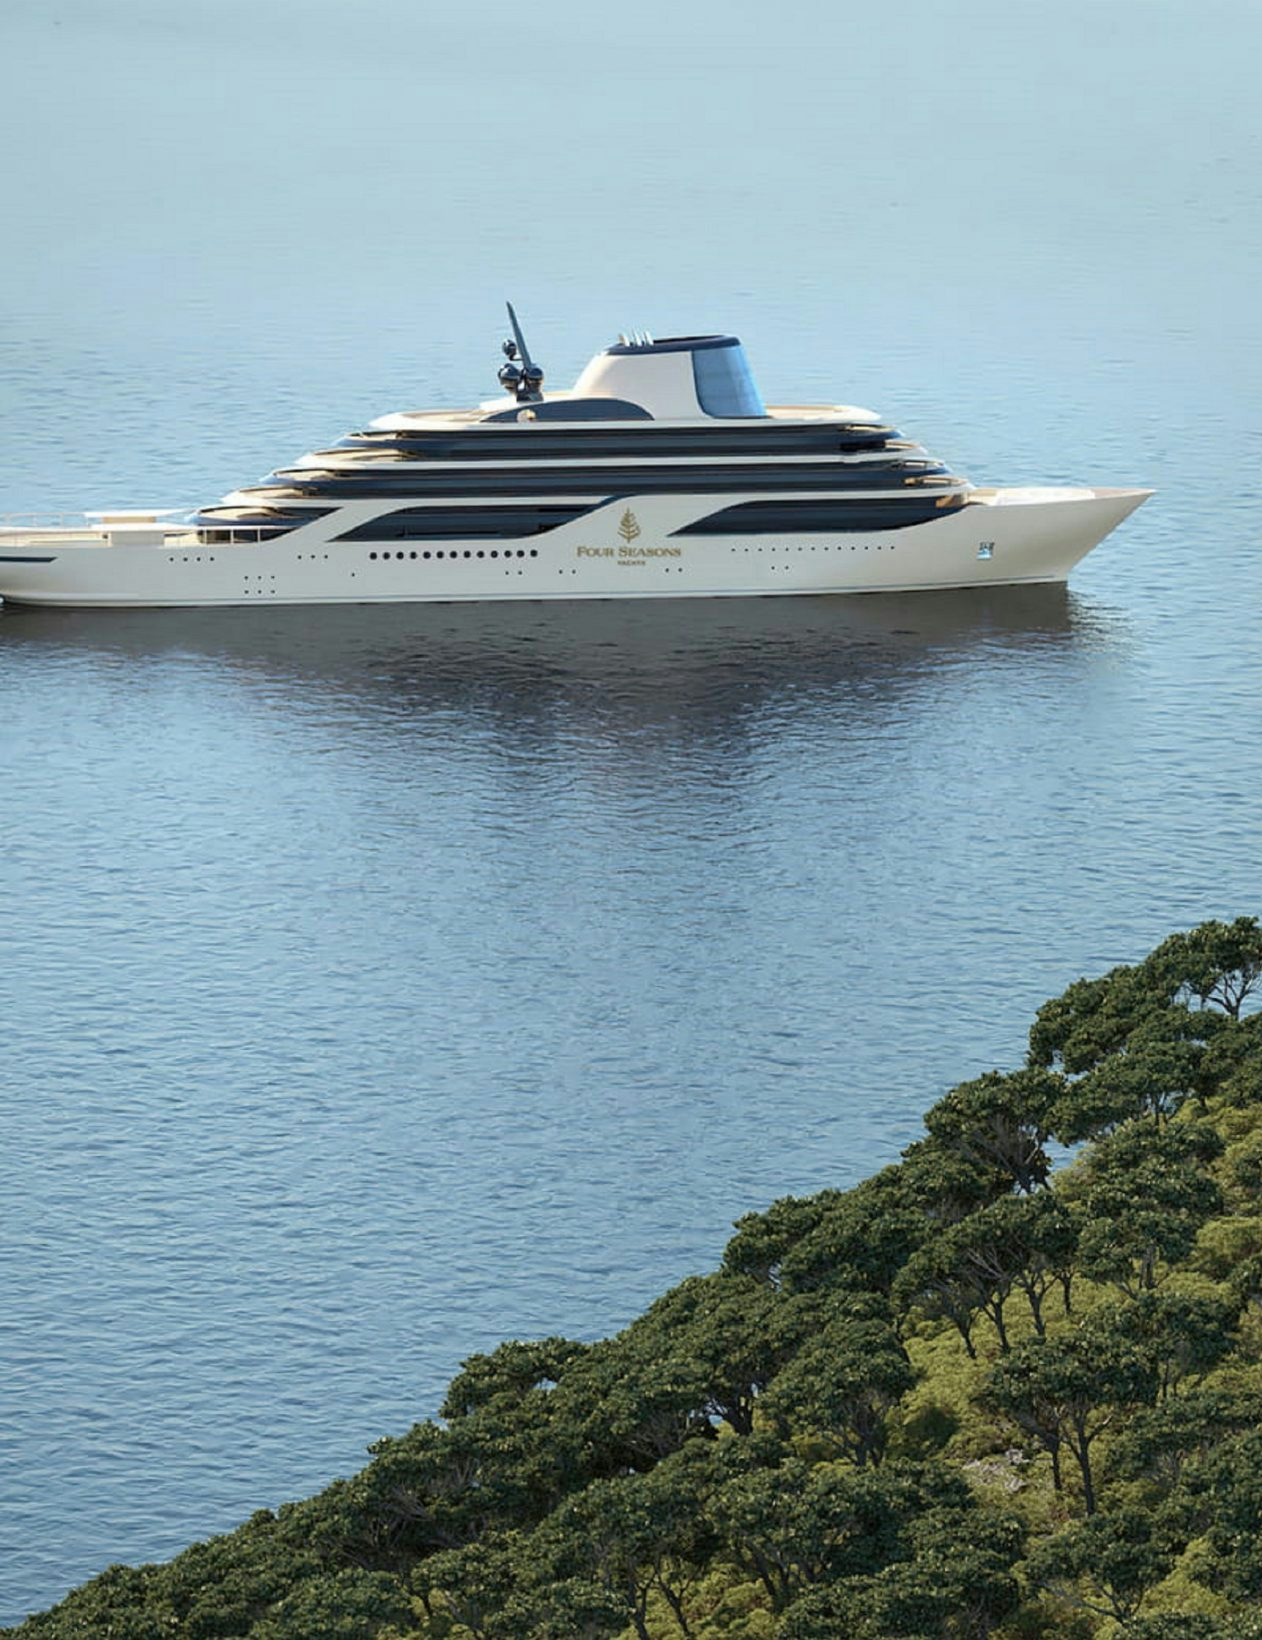 Four Seasons diversification: Super-yacht and luxury item rentals